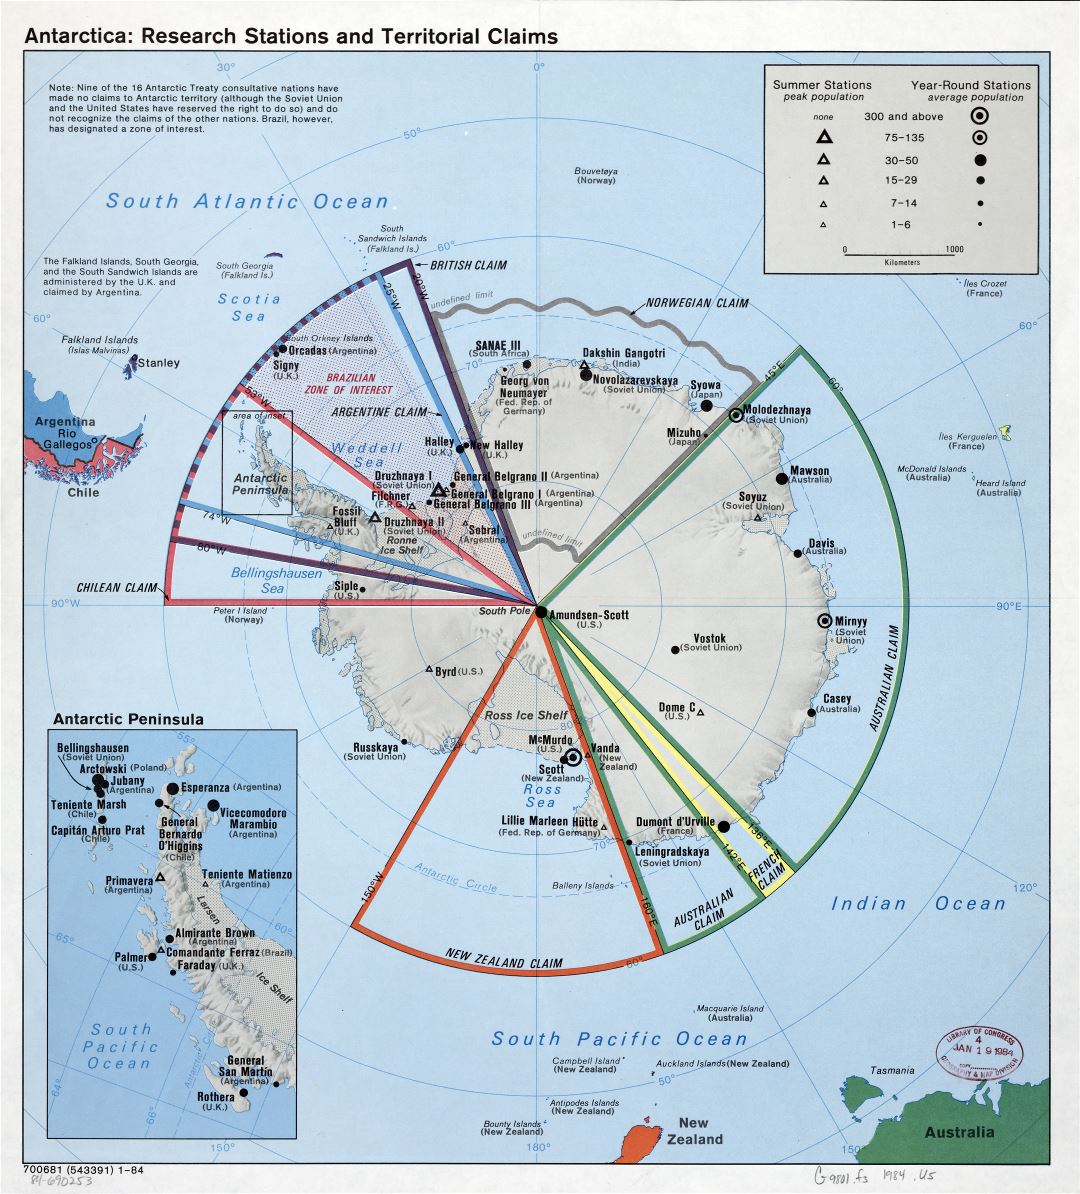 Large scale map of the Antarctica research stations and territorial claims - 1984